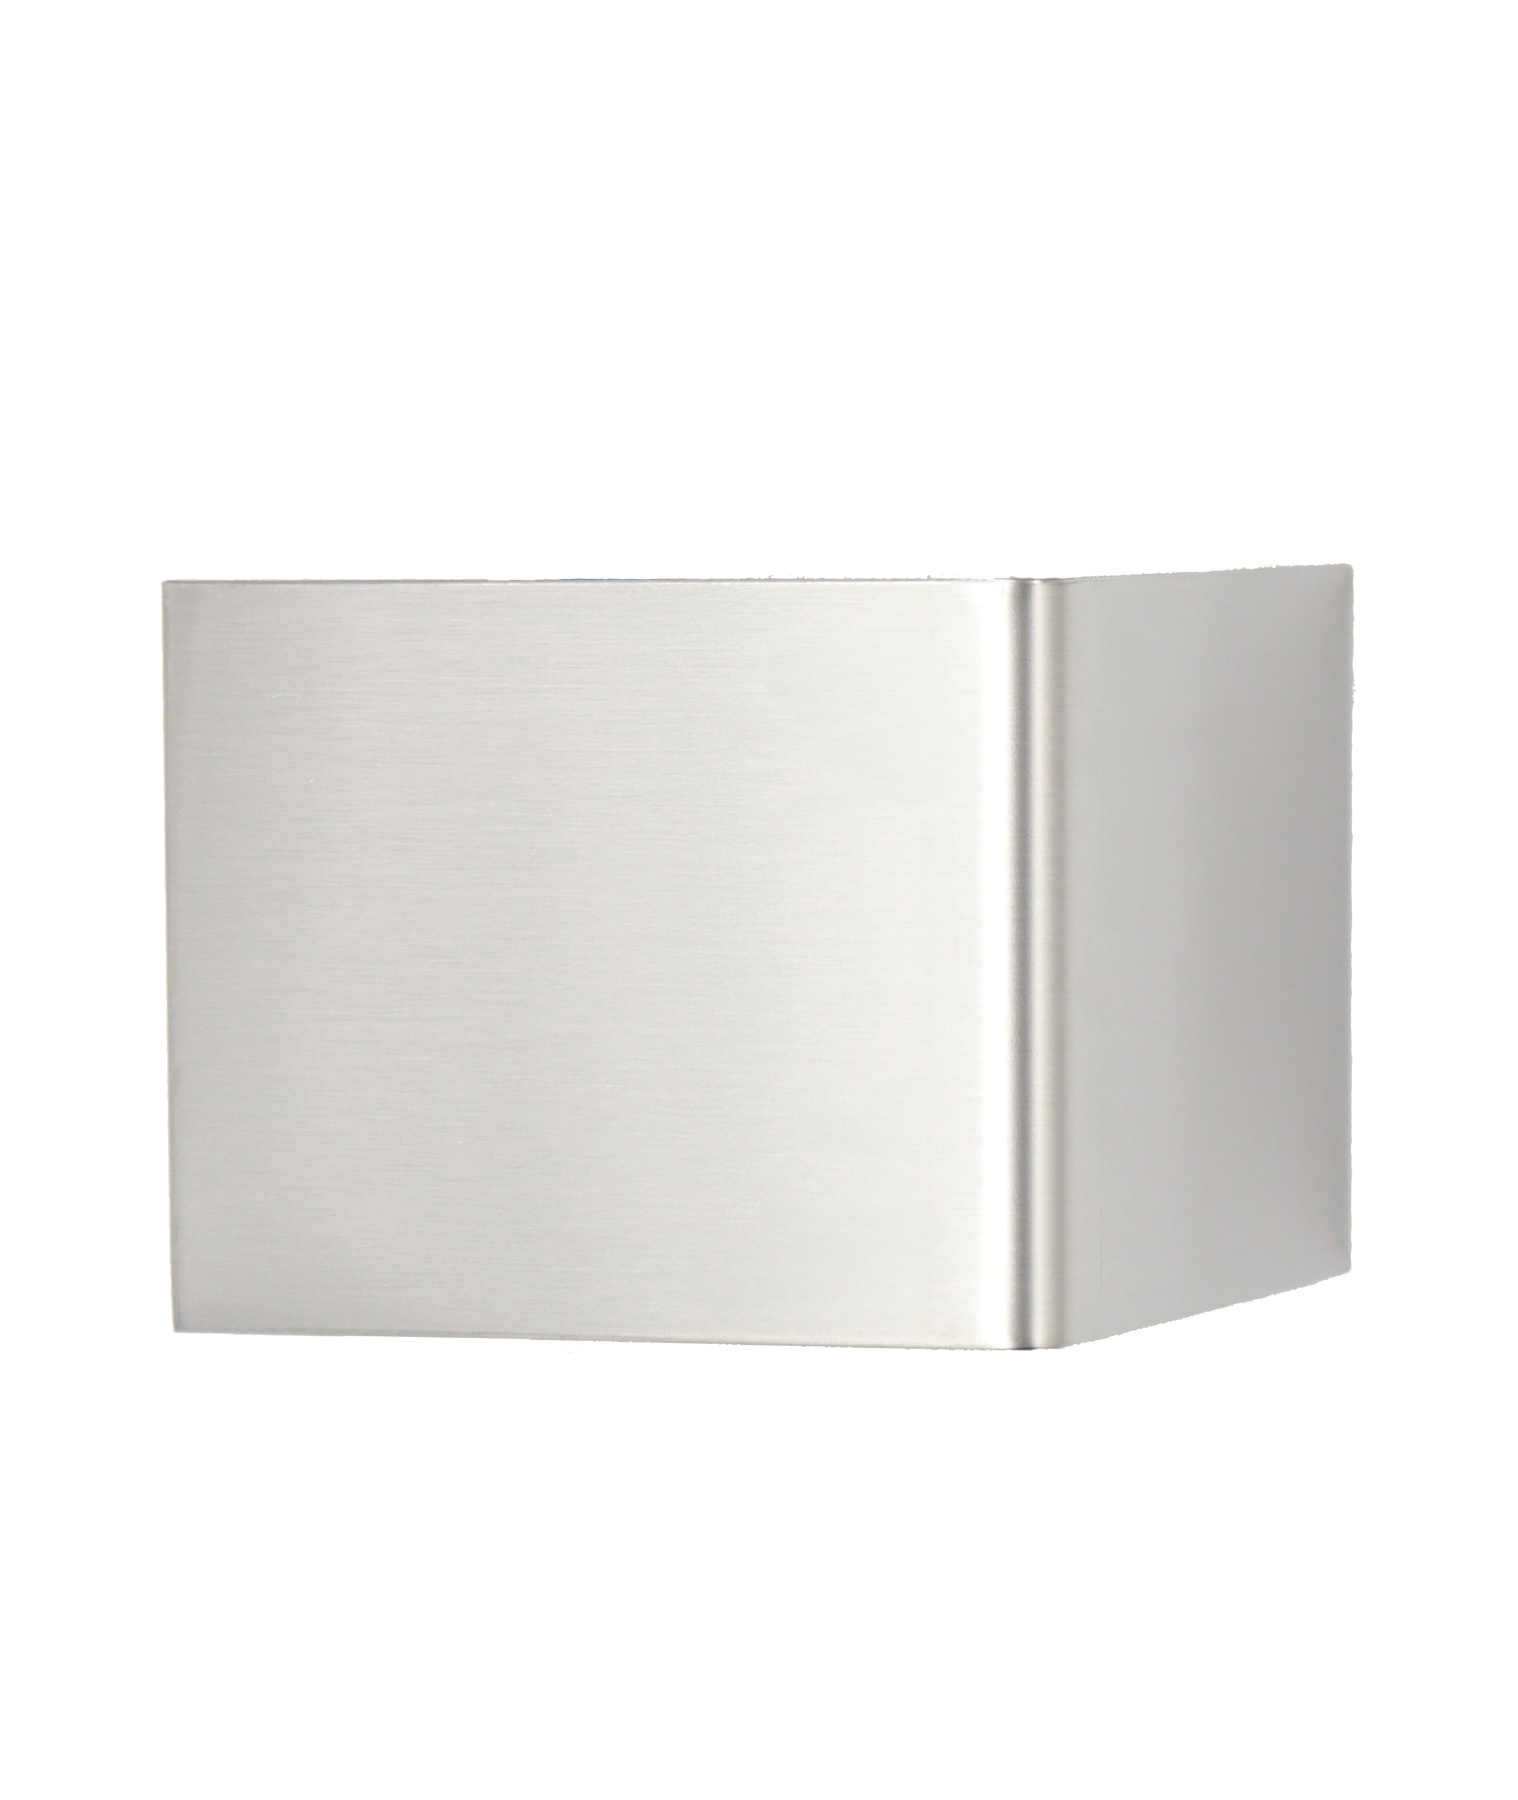 https://www.stainlessbase.com/mm5/graphics/00000001/1/2-inch-outside-corner-wall-base-stainless.png